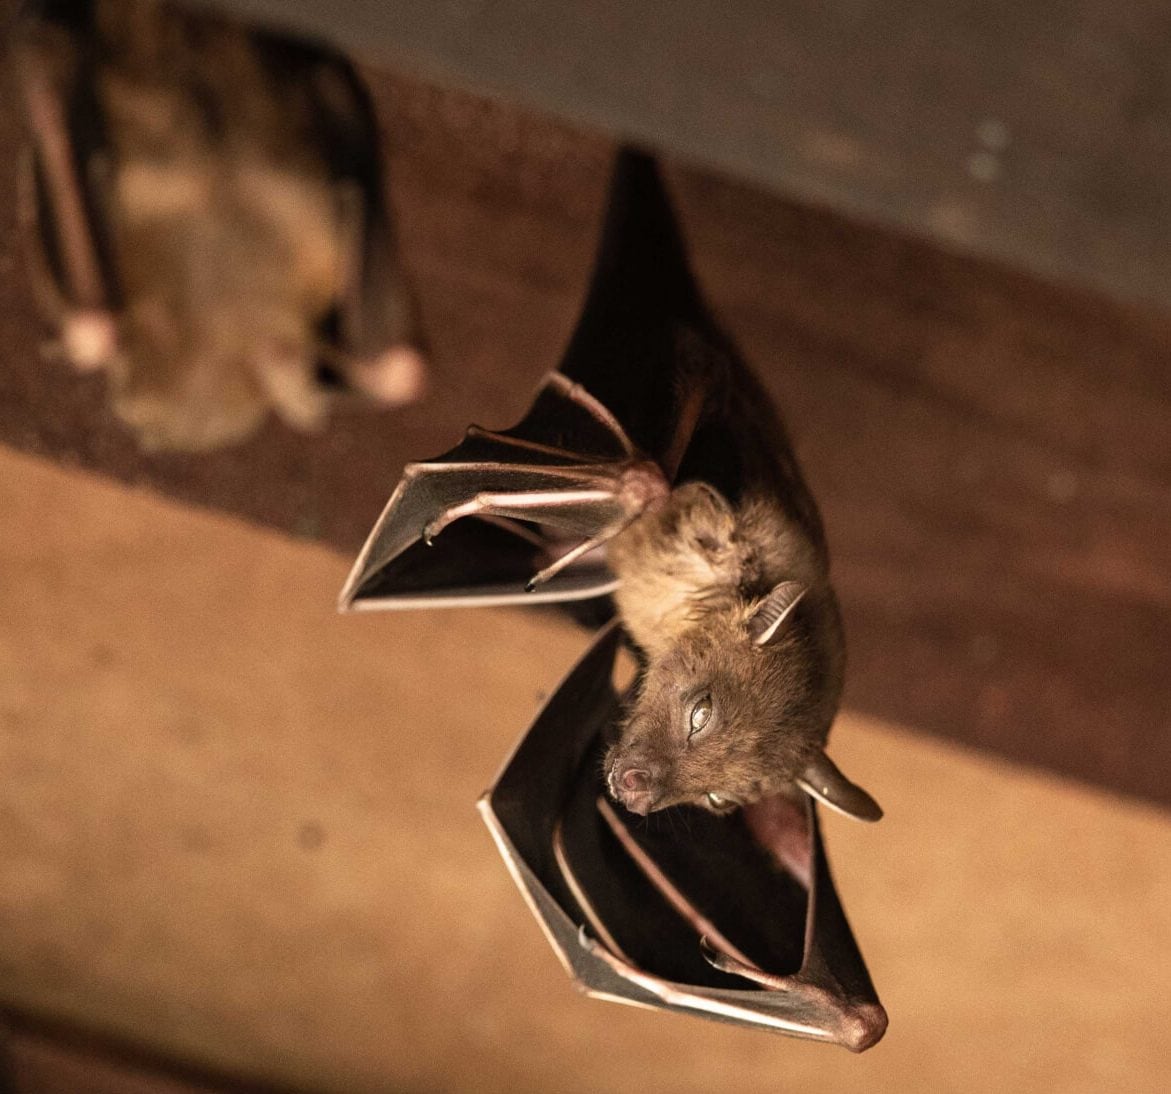 Expert bat removal services for a safe and humane solution in Portland